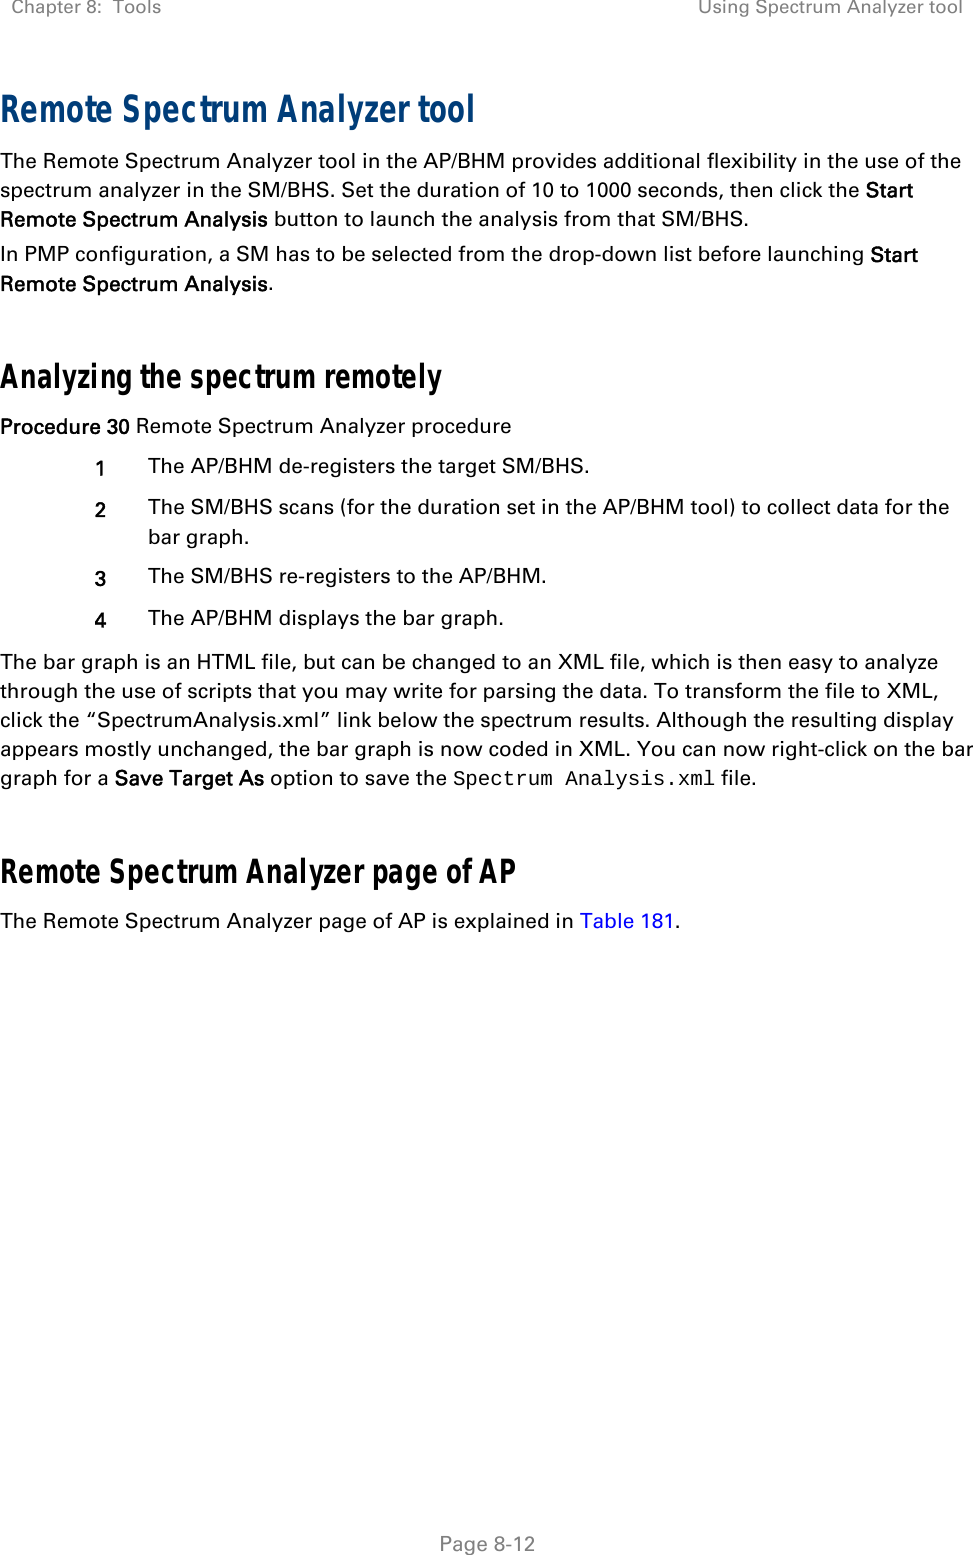 Chapter 8:  Tools  Using Spectrum Analyzer tool   Page 8-12 Remote Spectrum Analyzer tool  The Remote Spectrum Analyzer tool in the AP/BHM provides additional flexibility in the use of the spectrum analyzer in the SM/BHS. Set the duration of 10 to 1000 seconds, then click the Start Remote Spectrum Analysis button to launch the analysis from that SM/BHS.  In PMP configuration, a SM has to be selected from the drop-down list before launching Start Remote Spectrum Analysis.  Analyzing the spectrum remotely Procedure 30 Remote Spectrum Analyzer procedure 1  The AP/BHM de-registers the target SM/BHS. 2  The SM/BHS scans (for the duration set in the AP/BHM tool) to collect data for the bar graph. 3  The SM/BHS re-registers to the AP/BHM. 4  The AP/BHM displays the bar graph. The bar graph is an HTML file, but can be changed to an XML file, which is then easy to analyze through the use of scripts that you may write for parsing the data. To transform the file to XML, click the “SpectrumAnalysis.xml” link below the spectrum results. Although the resulting display appears mostly unchanged, the bar graph is now coded in XML. You can now right-click on the bar graph for a Save Target As option to save the Spectrum Analysis.xml file.  Remote Spectrum Analyzer page of AP The Remote Spectrum Analyzer page of AP is explained in Table 181. 